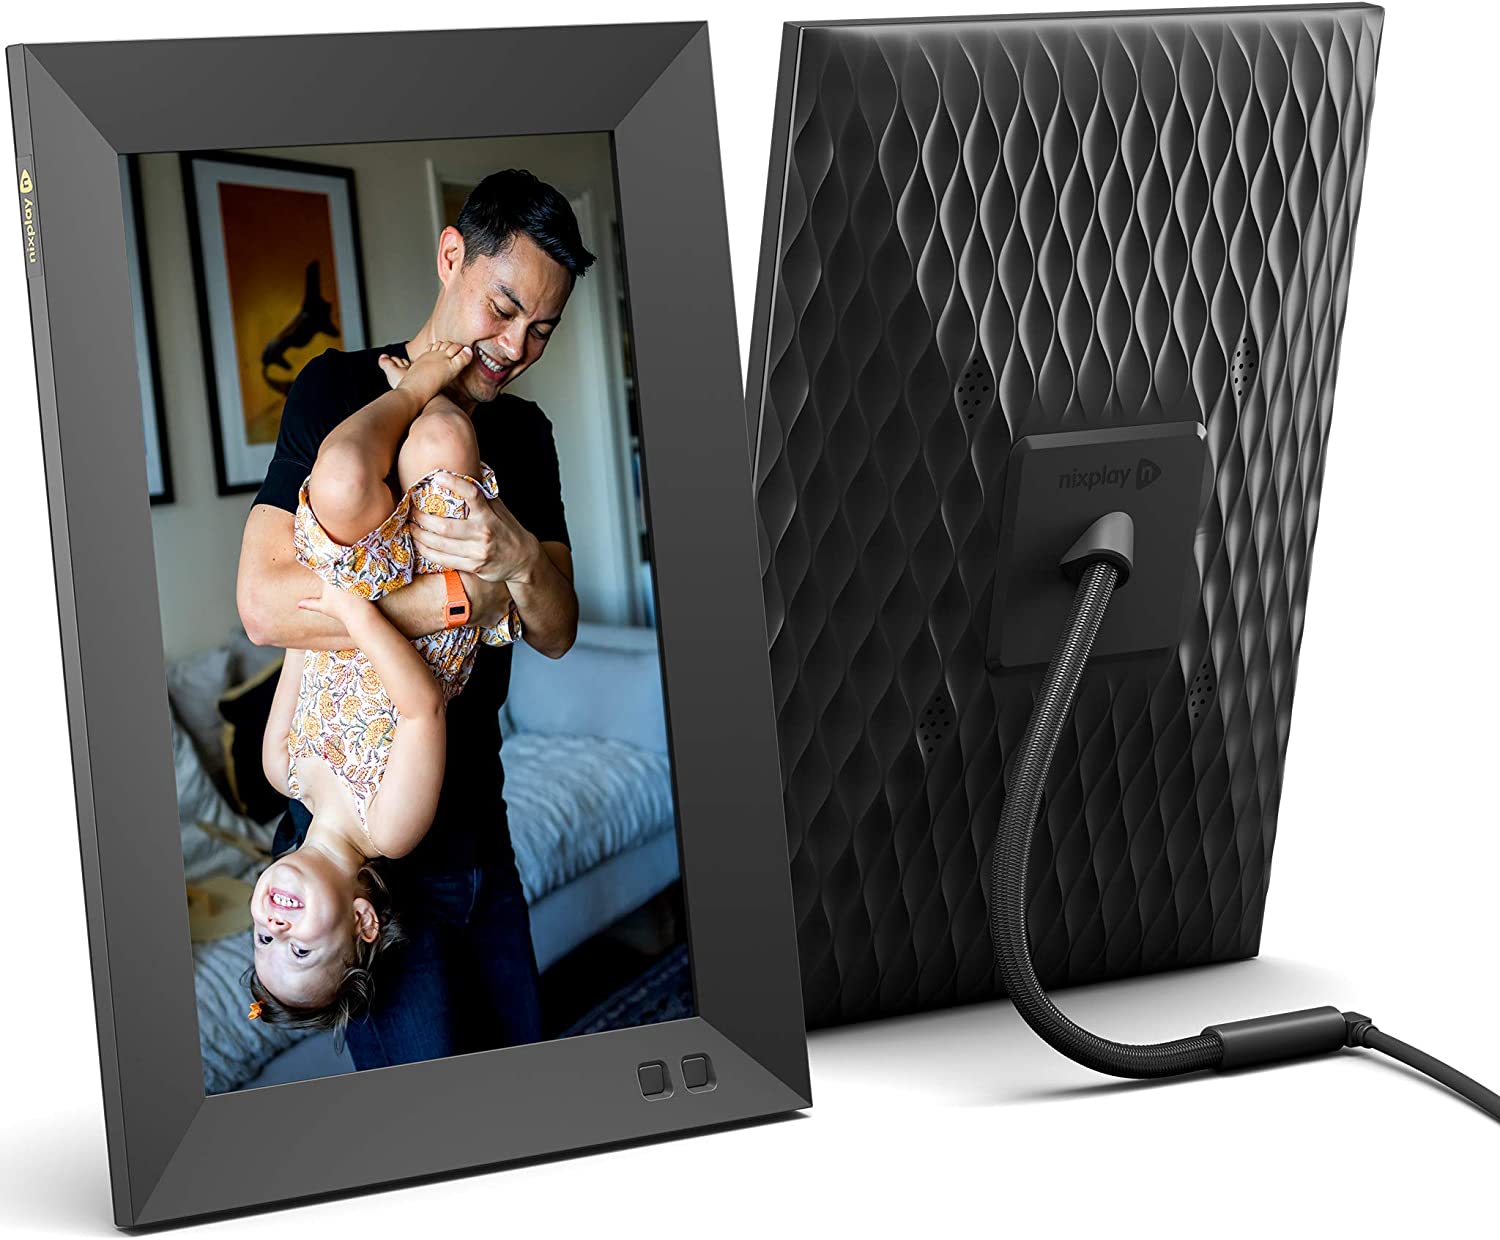 Nixplay 10.1 inch Smart Digital Photo Frame with WiFi (W10F) - Black - Share Photos and Videos Instantly via Email or App - Smart Tech Shopping